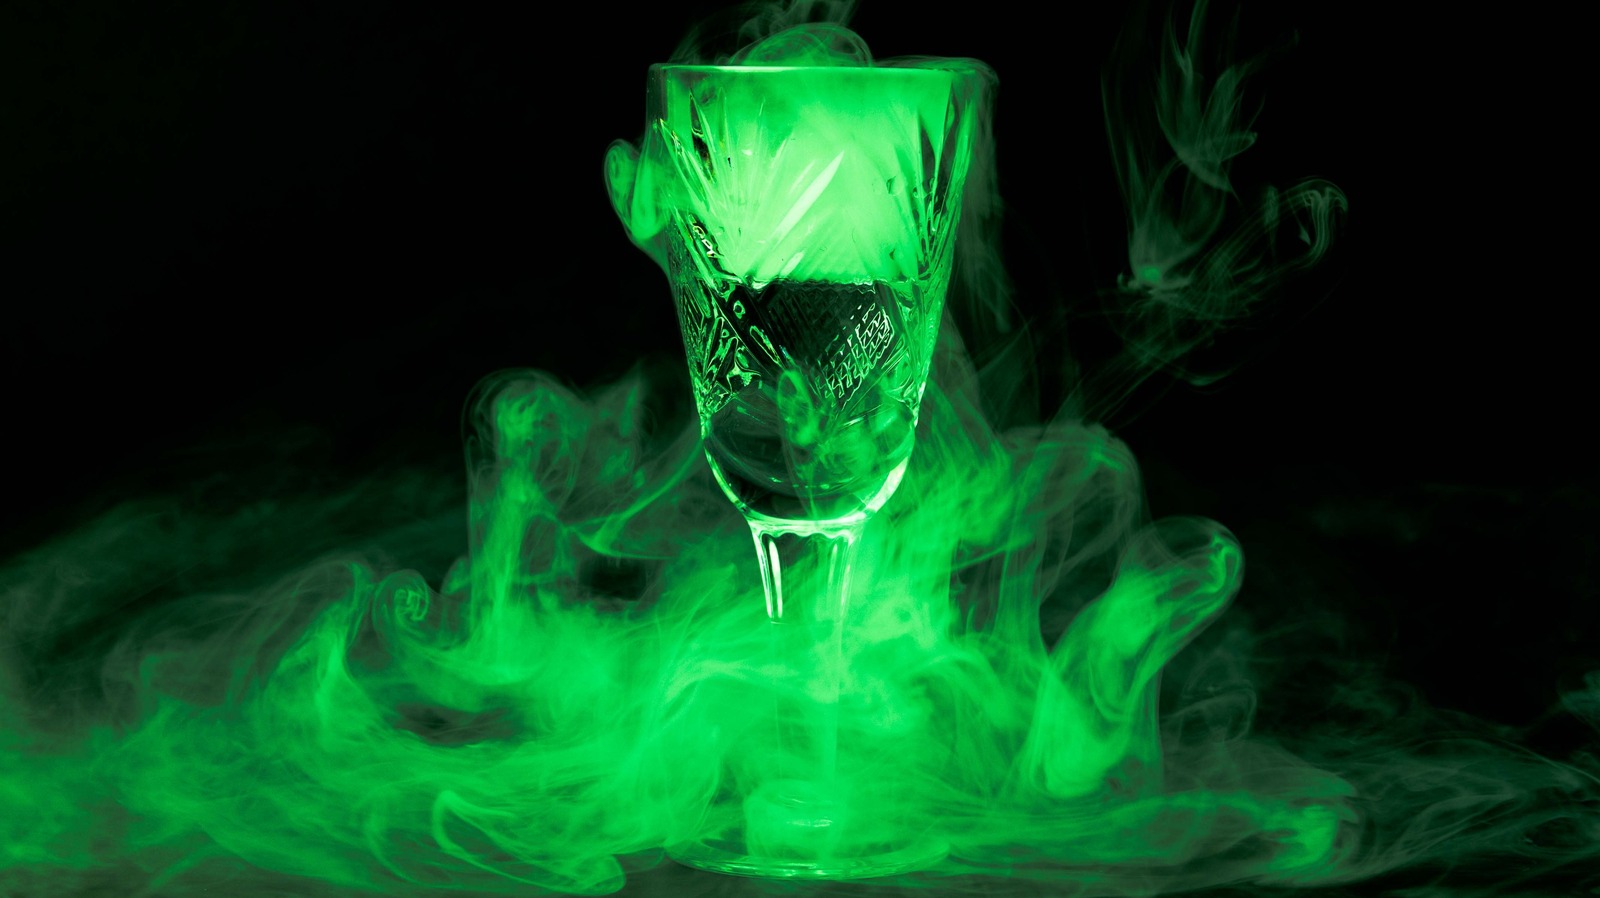 How to Use Dry Ice in Halloween Cocktails – Holiday Cottage